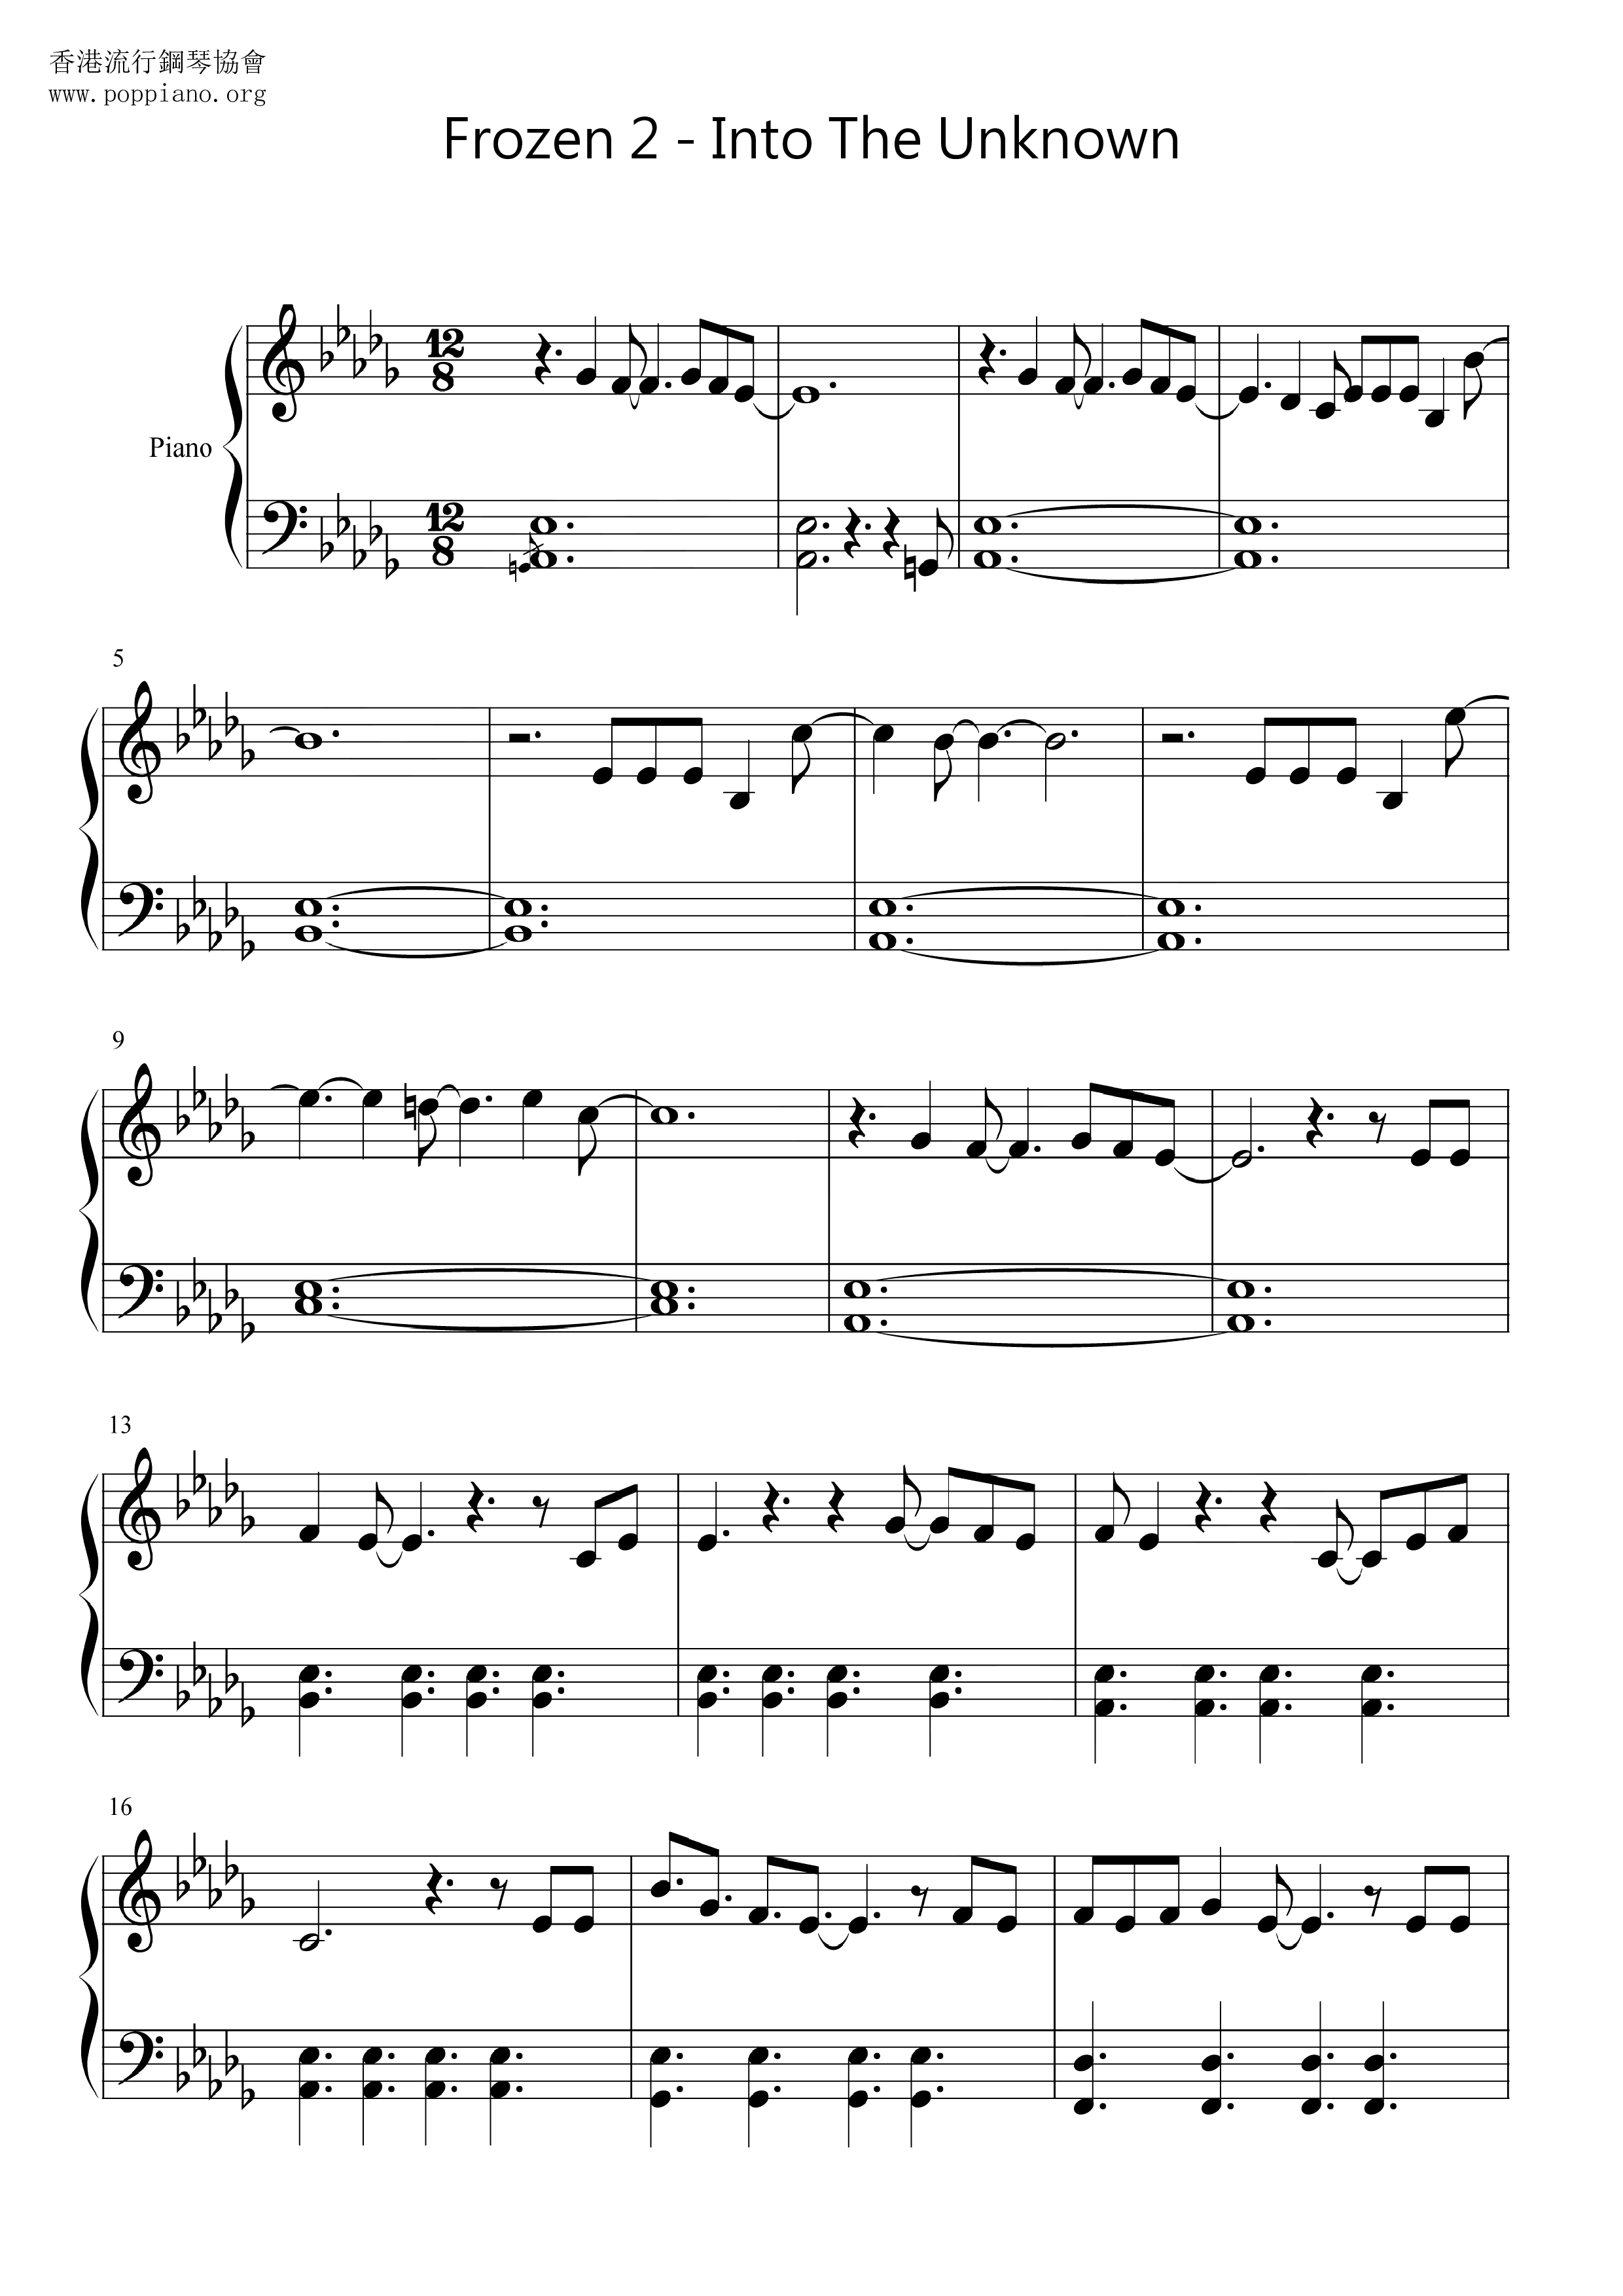 Frozen 2 - Into The Unknown Score